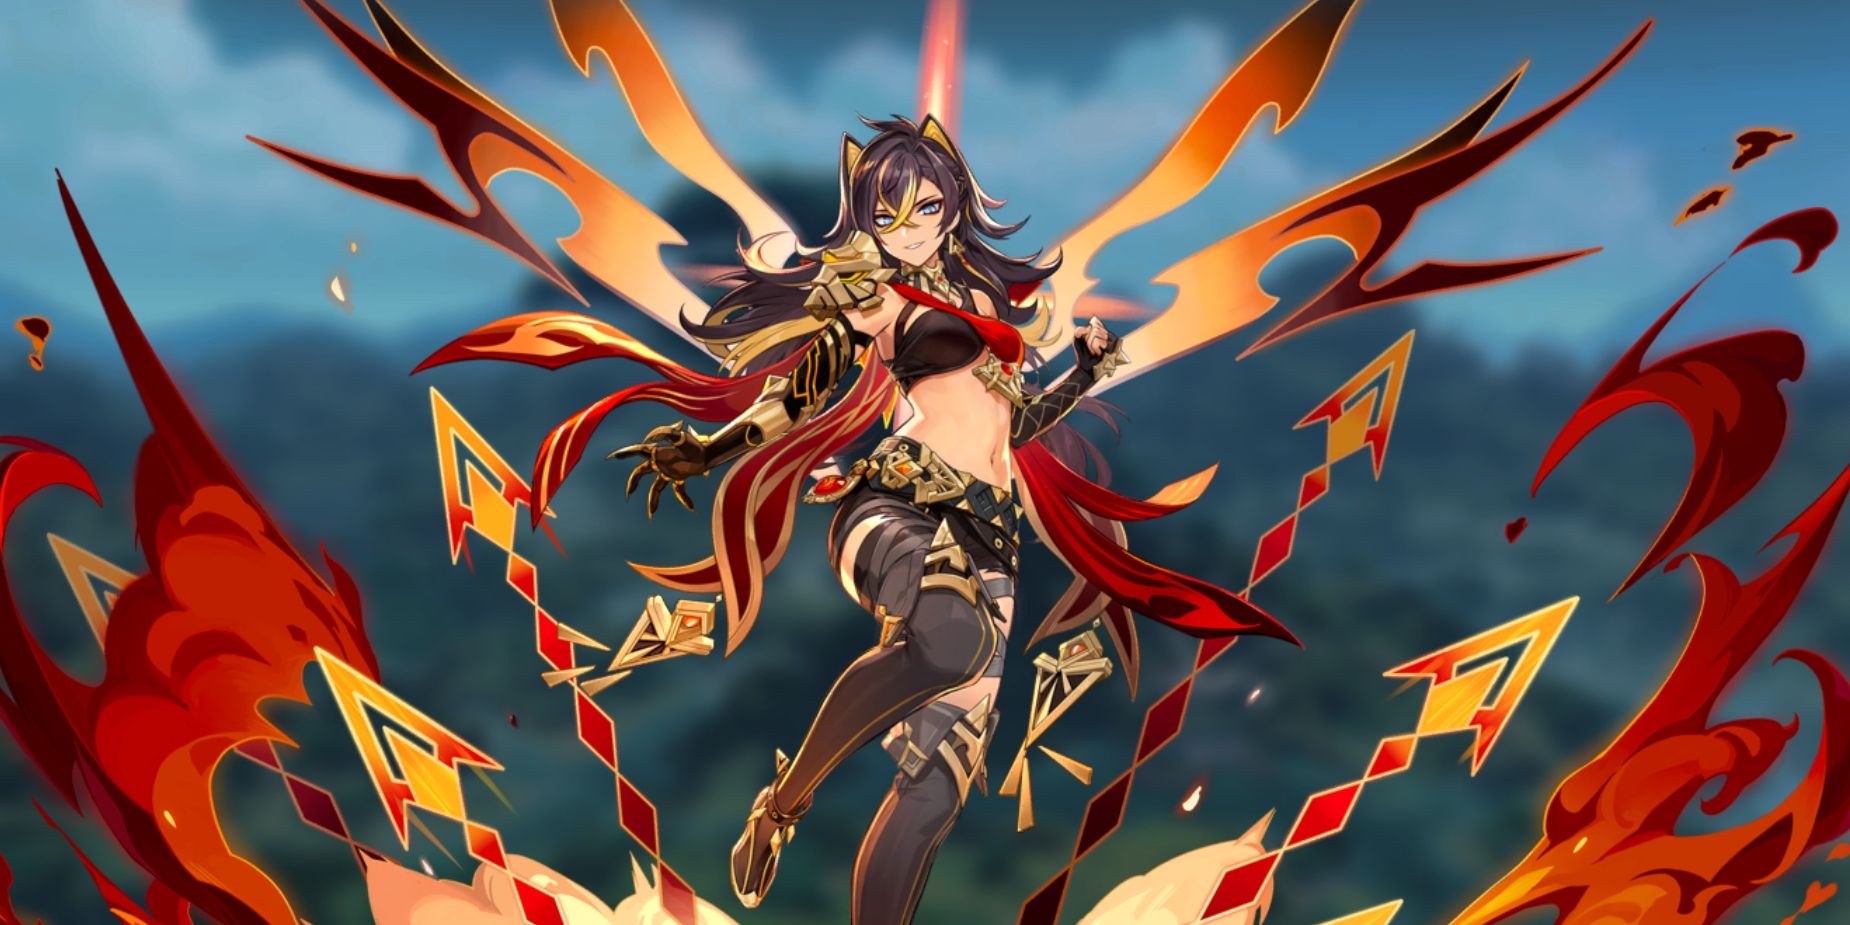 Genshin Impact's Dehya poses in the middle while fire and fiery spears explode to her sides. Blurred-out in the background is an image of the Sumeru landscape.